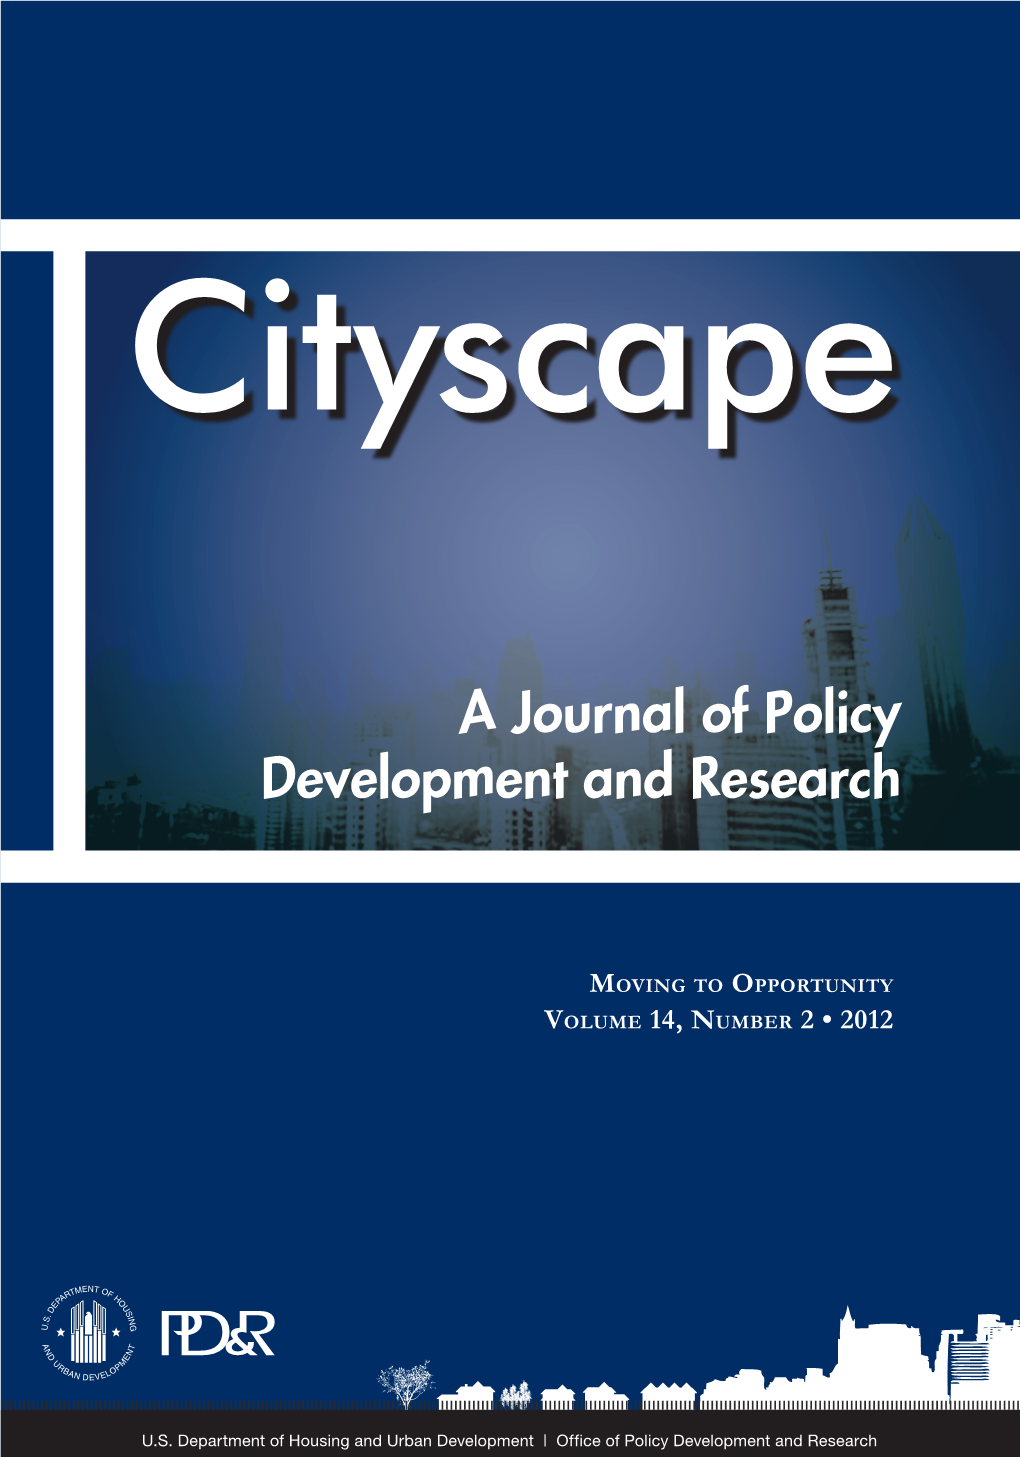 A Journal of Policy Development and Research